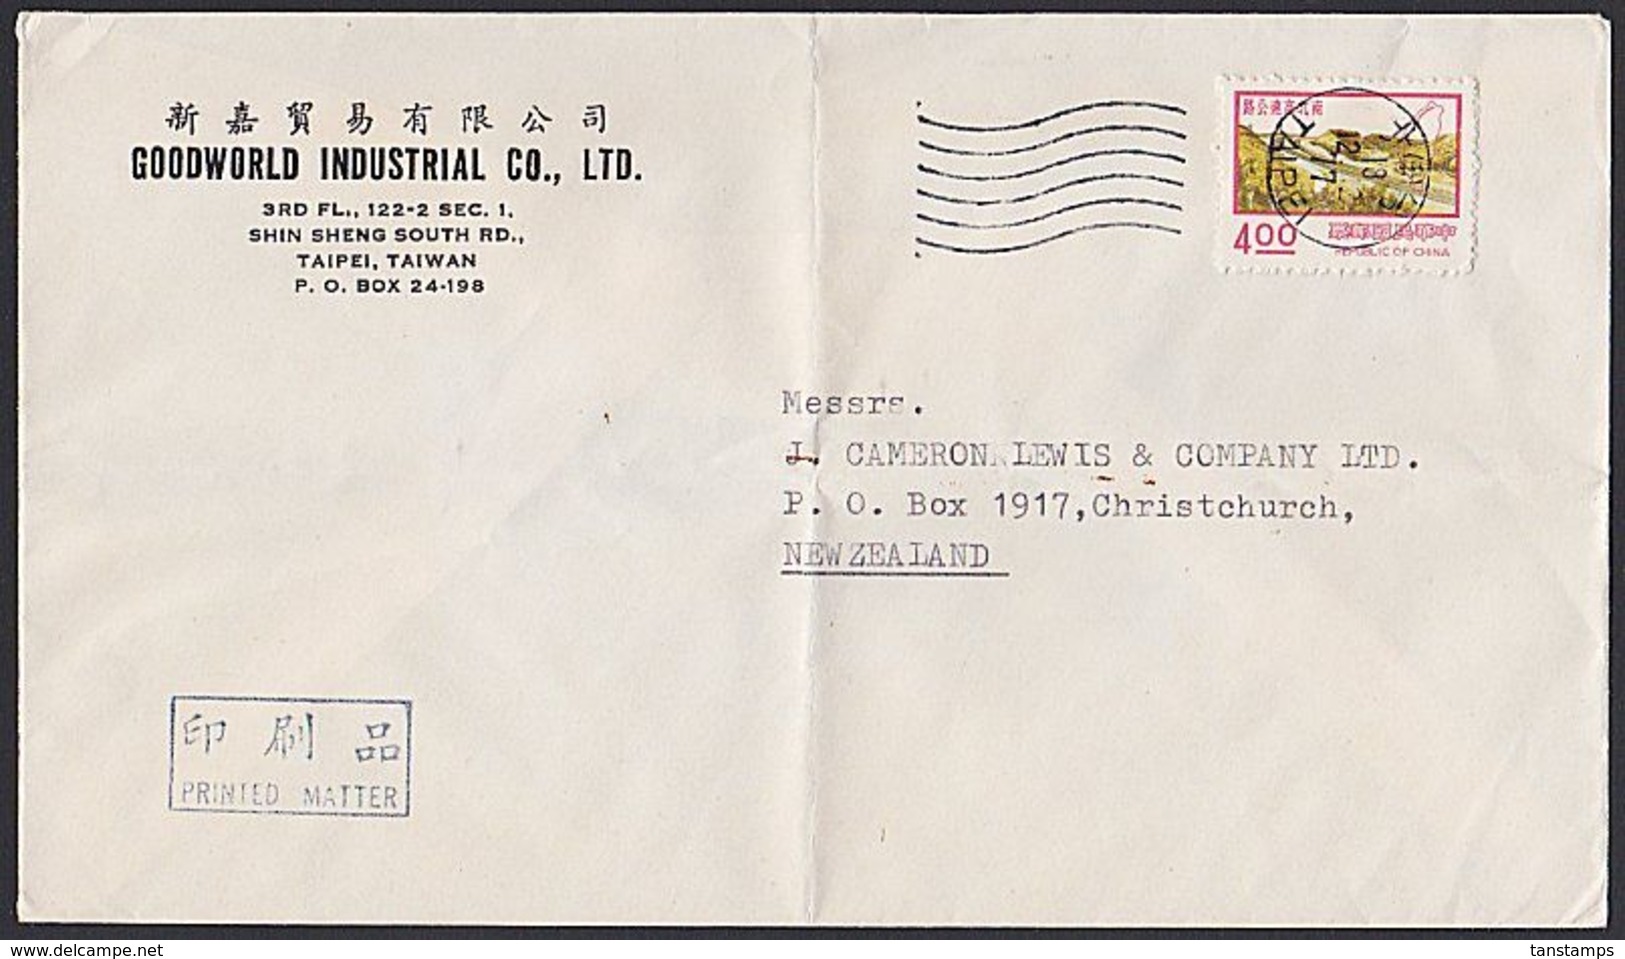 TAIWAN - NEW ZEALAND PRINTED MATTER COMMERCIAL COVER. - Lettres & Documents